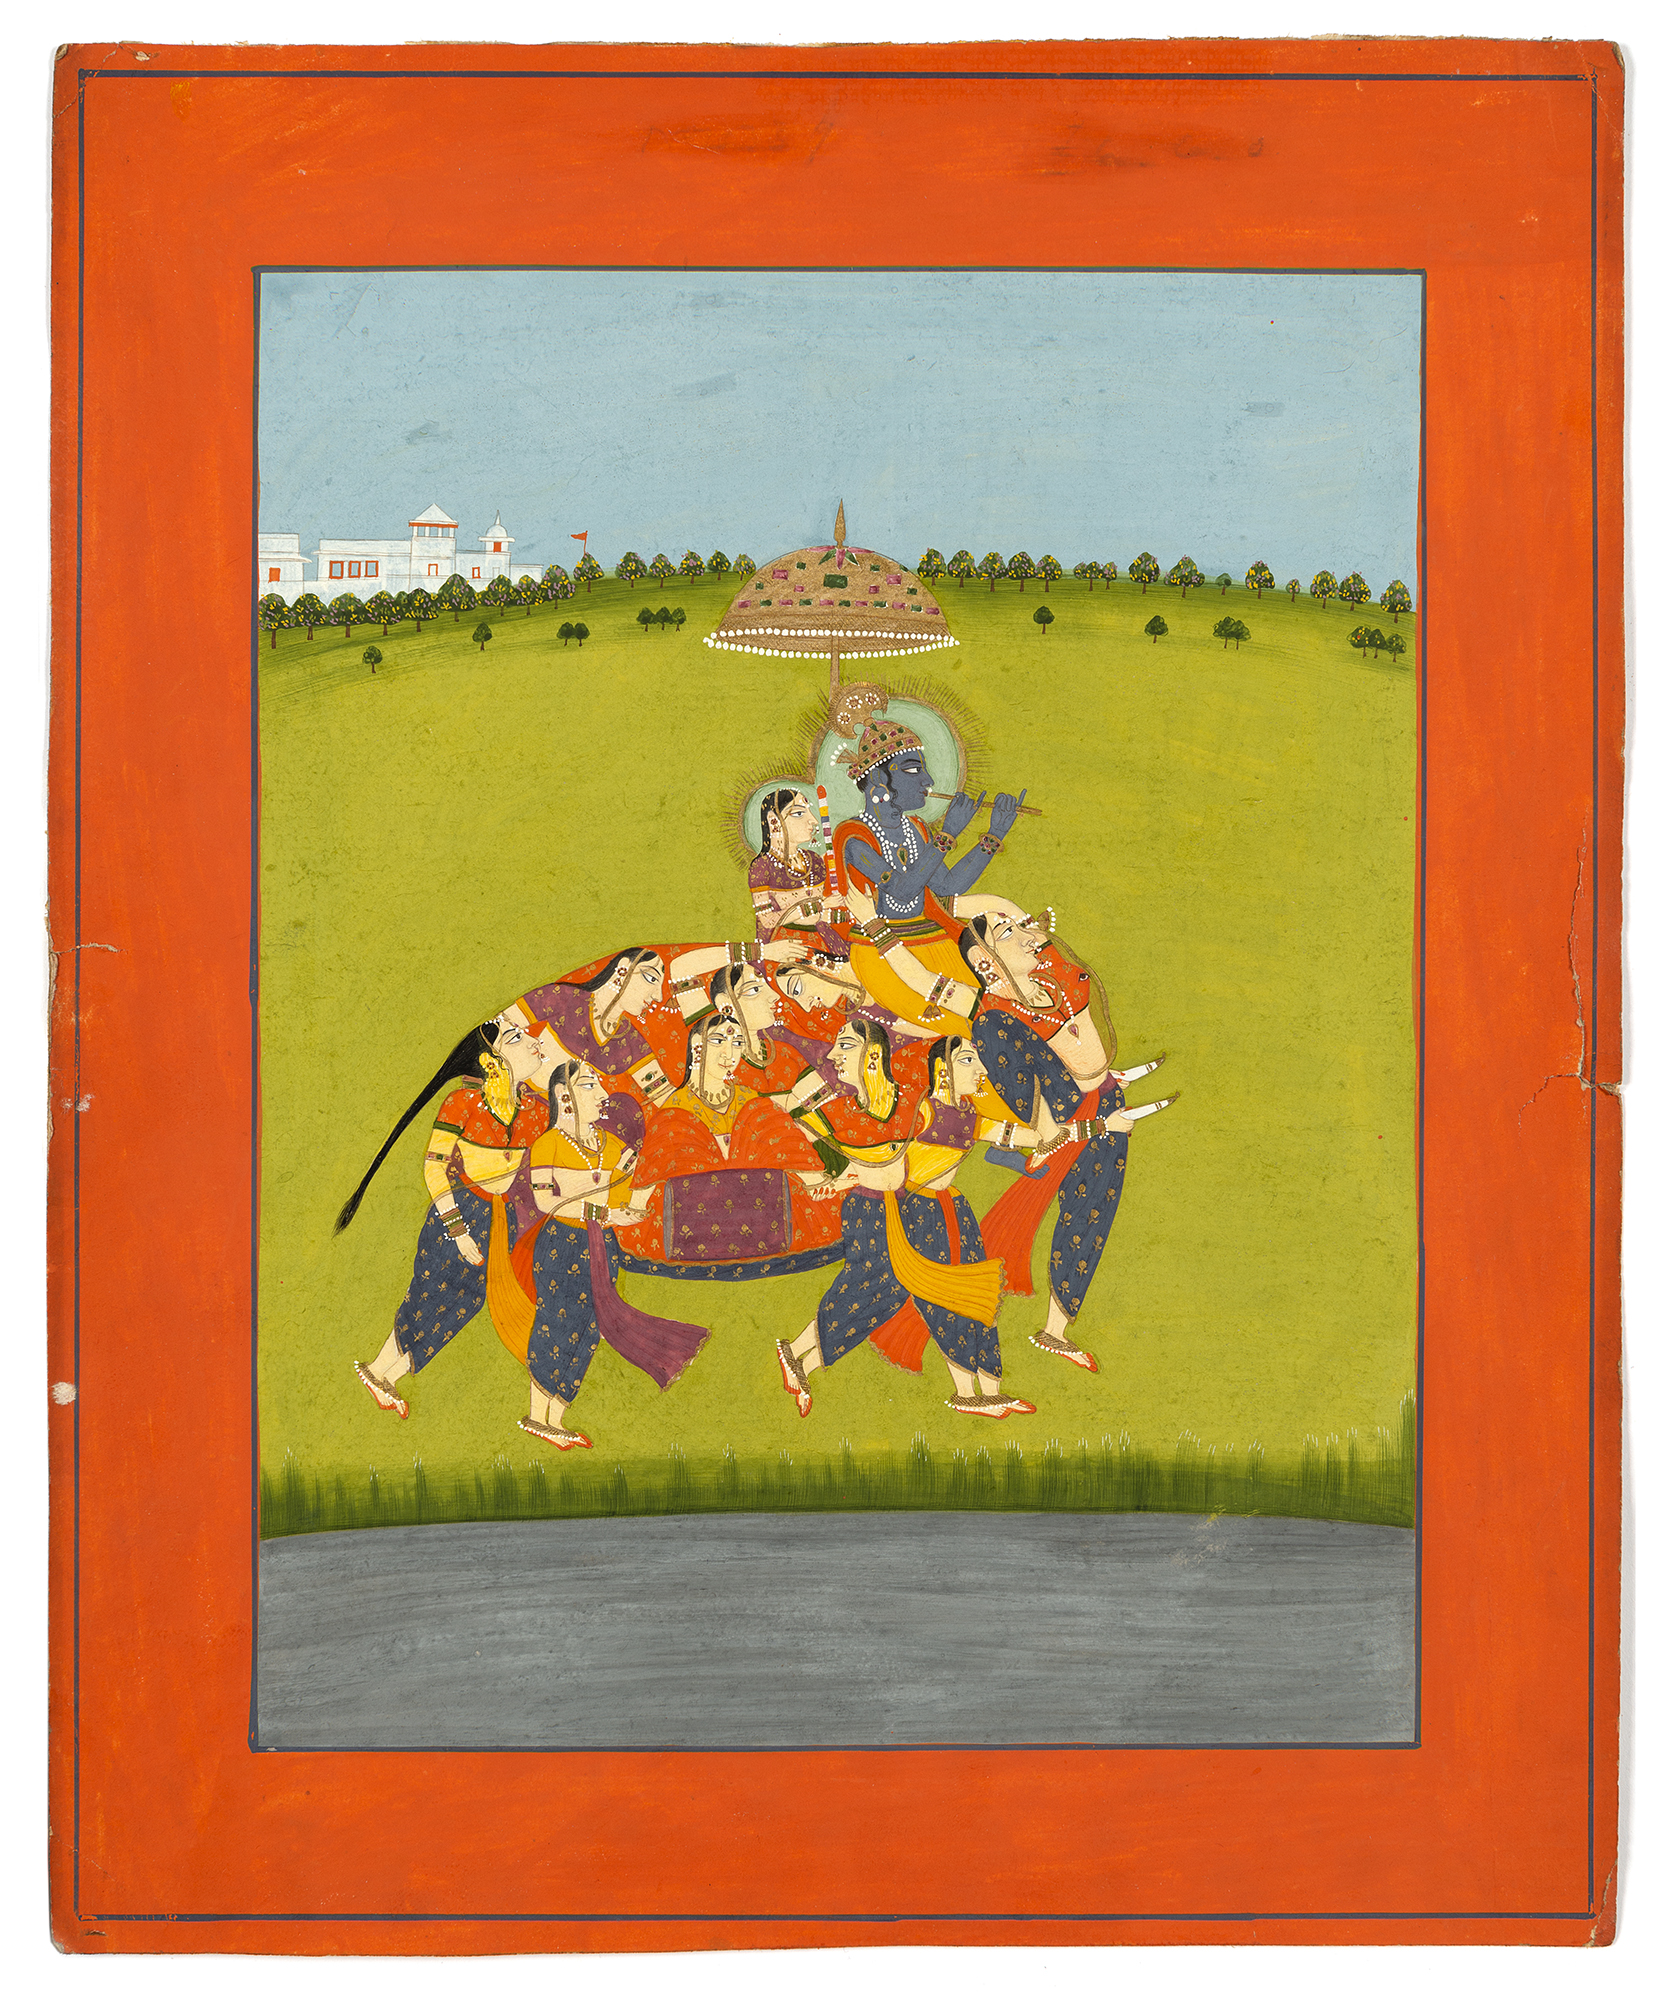 Painting of a female figure and a male figure riding an elephant comprised of female figures